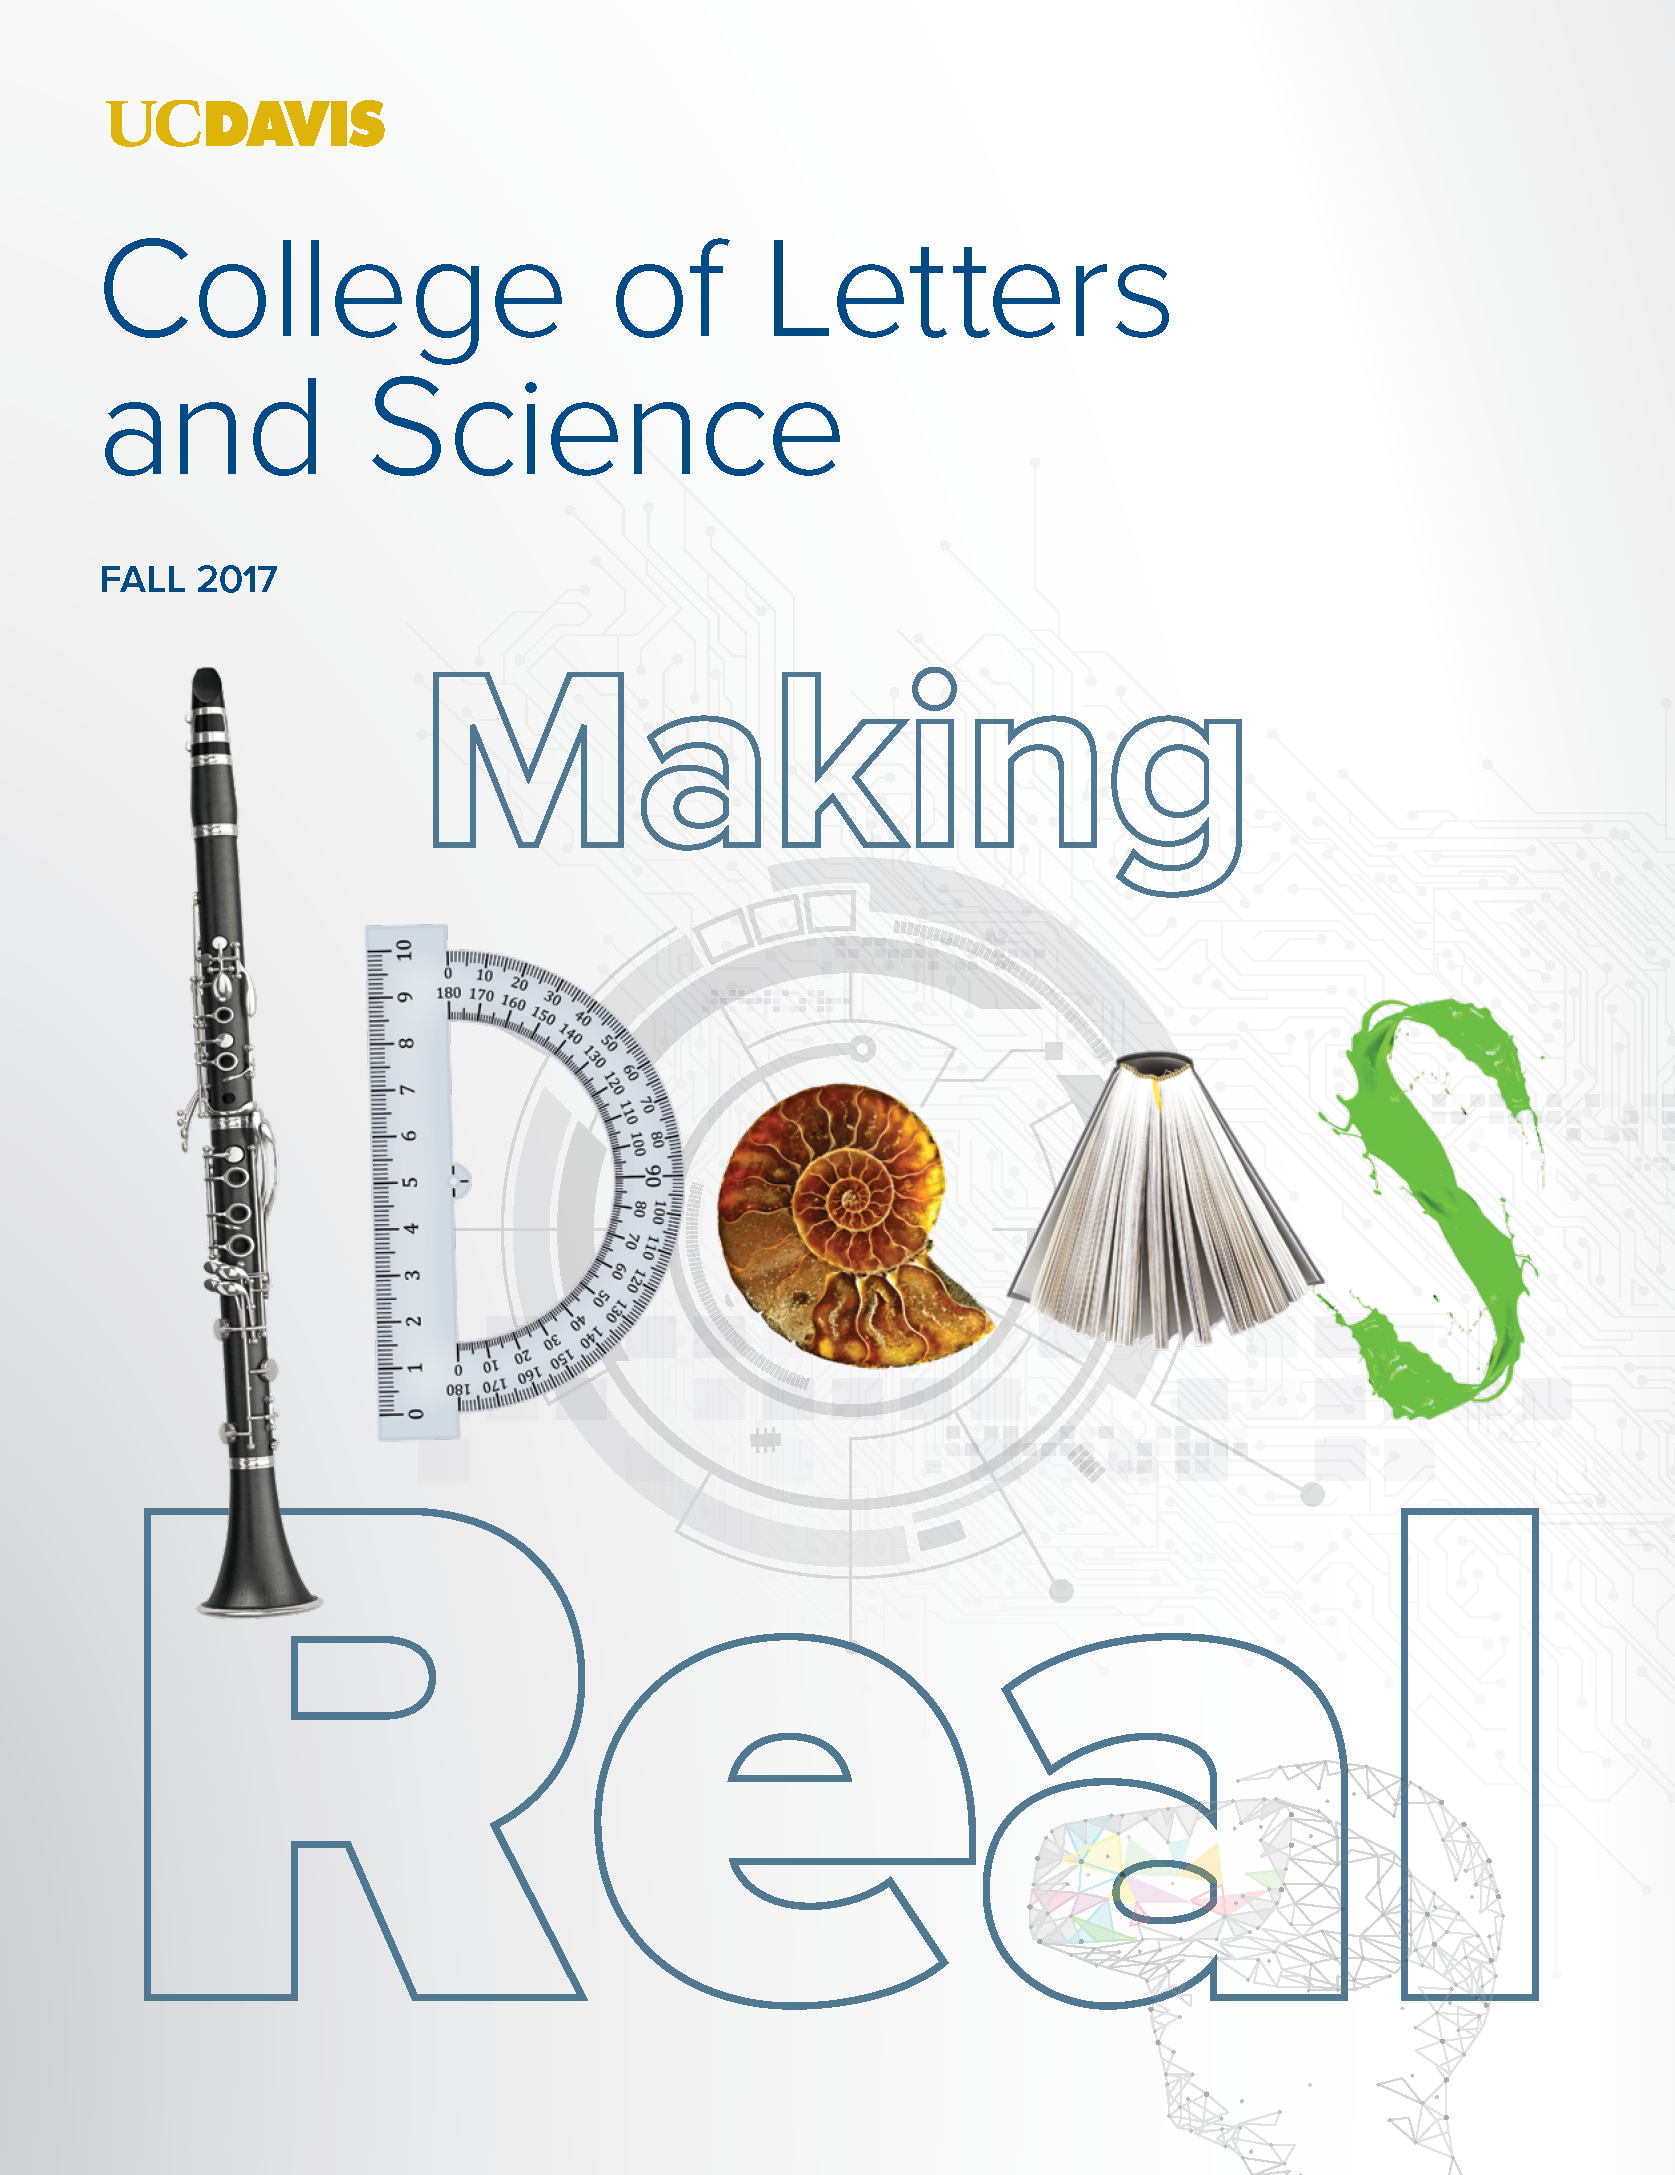 A clarinet, protractor, among other objects, spell out Ideas on the cover.